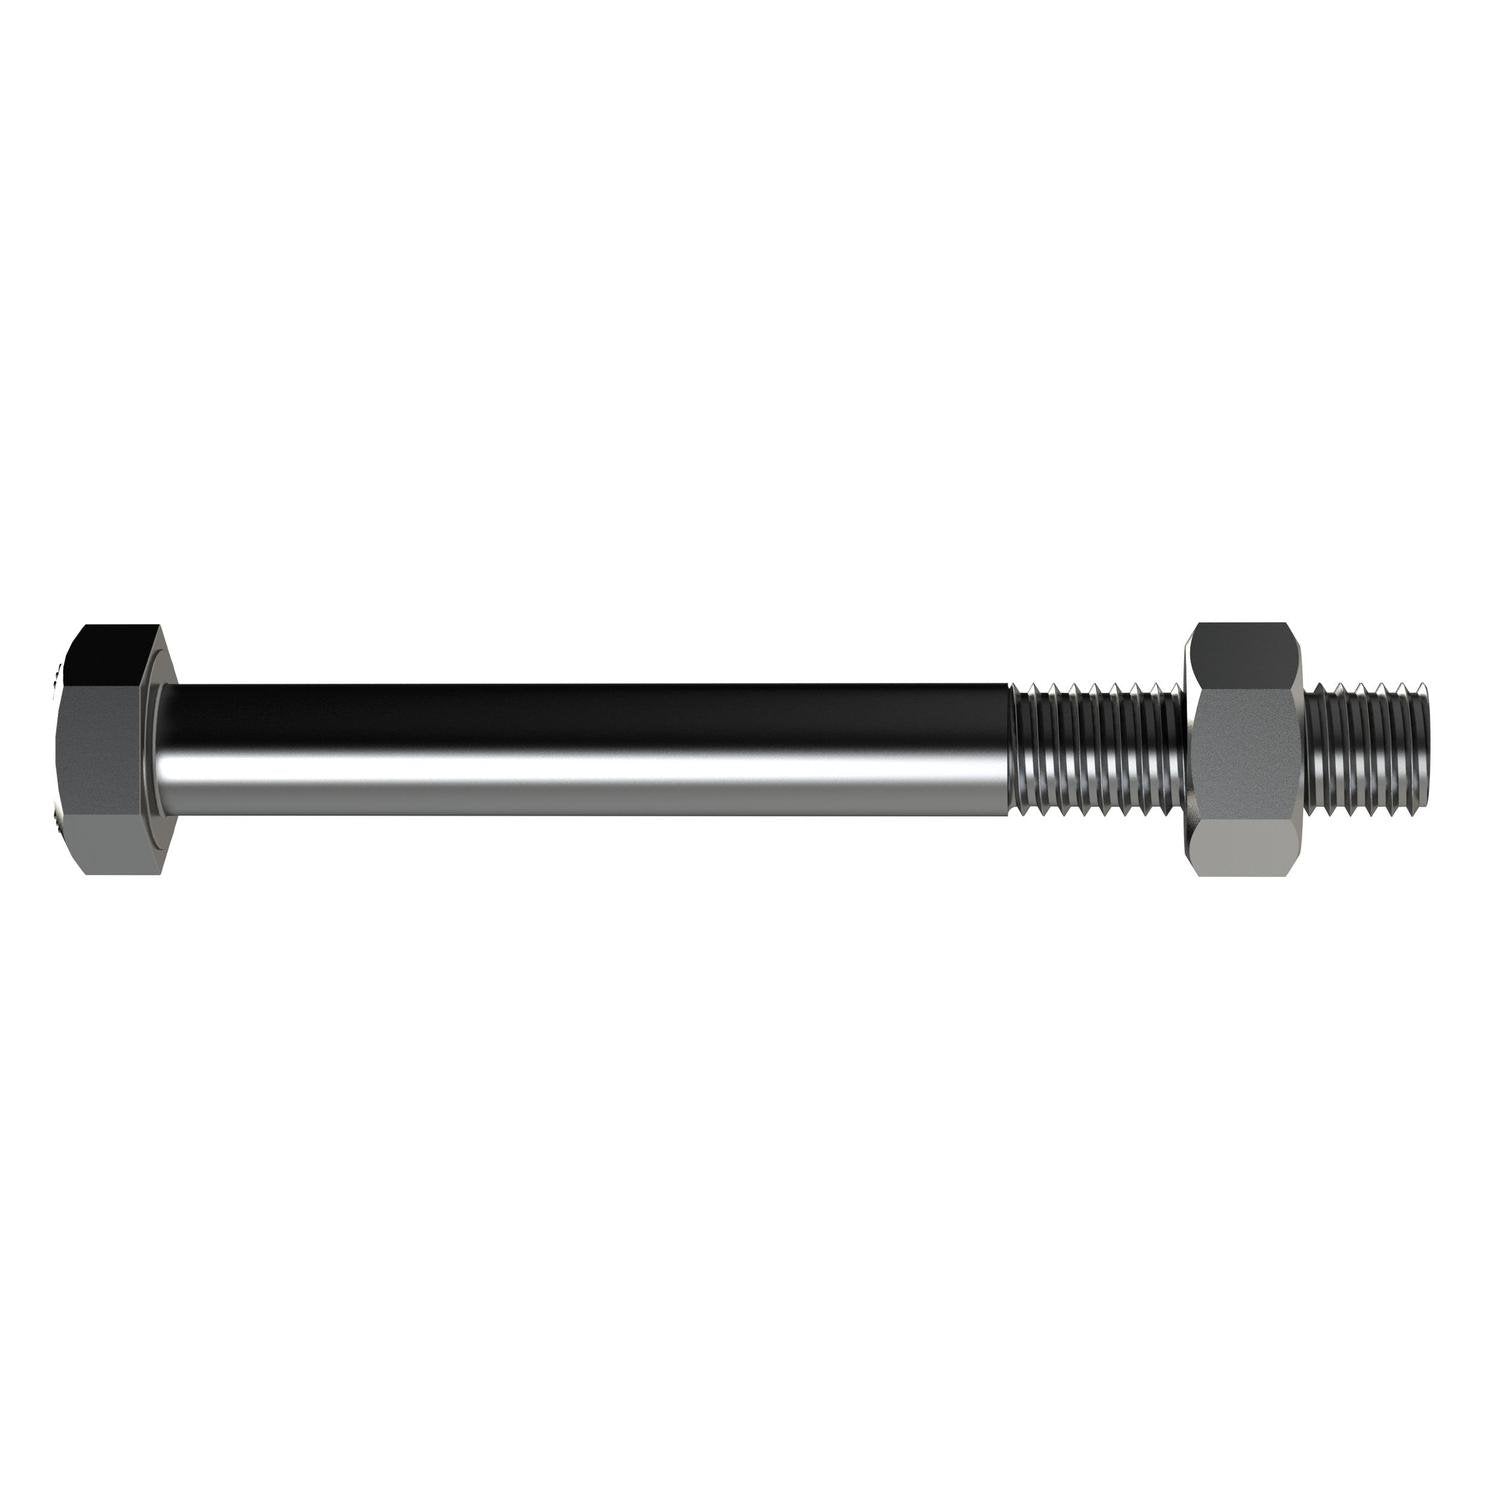 Bremick Engineer Bolt & Nut M16 X 120Mm Stainless Steel